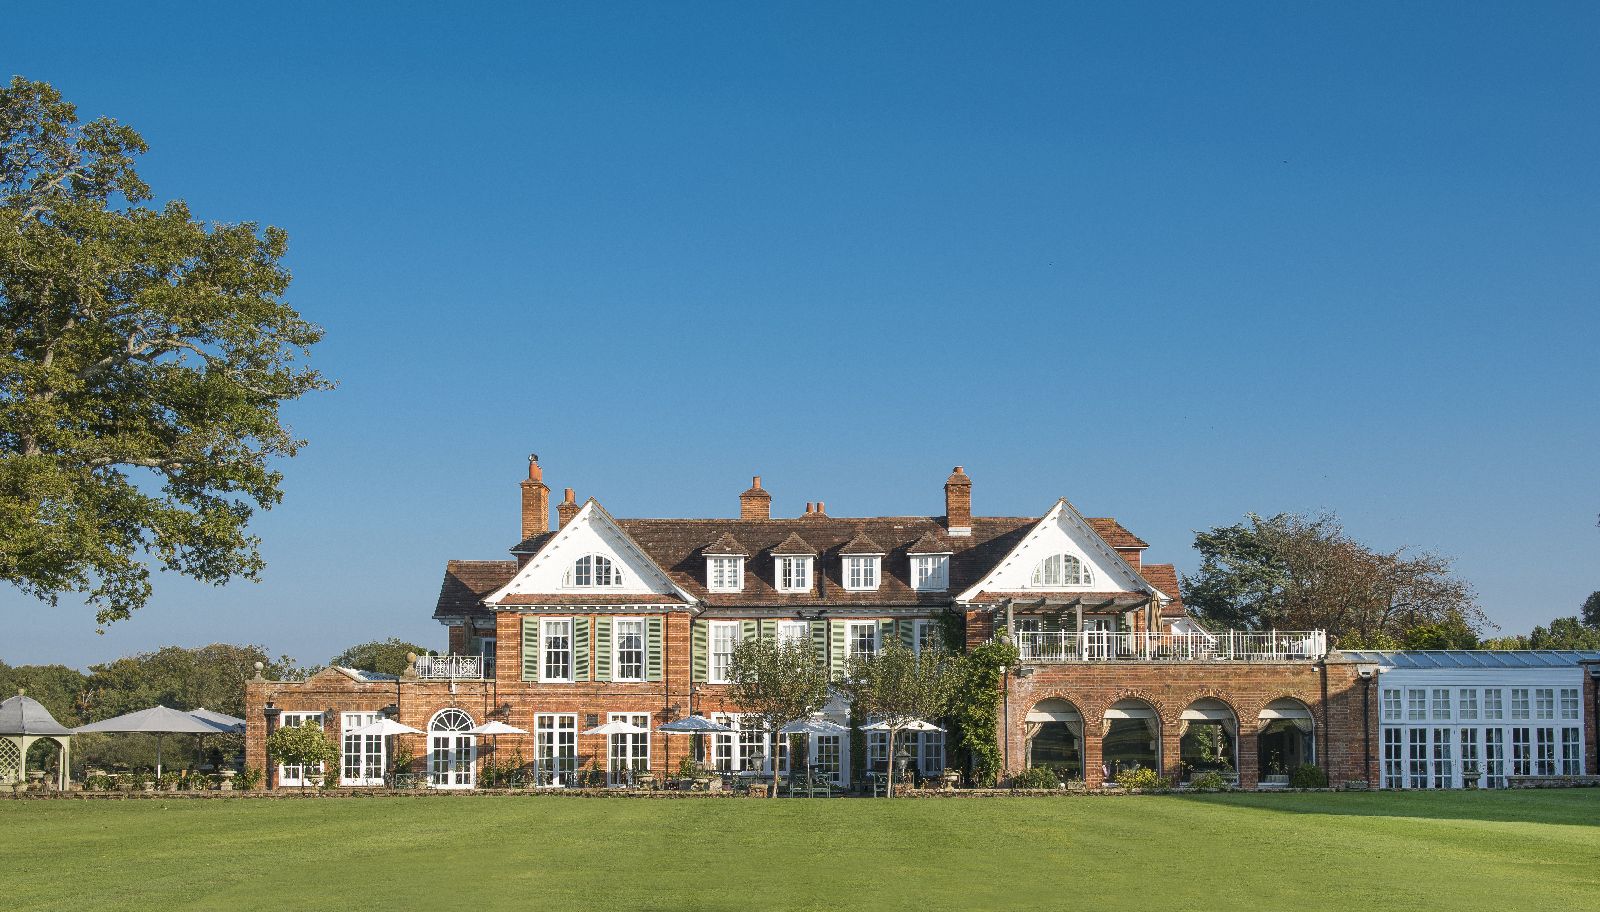 Exterior and grounds of at Chewton Glen in Hampshire England